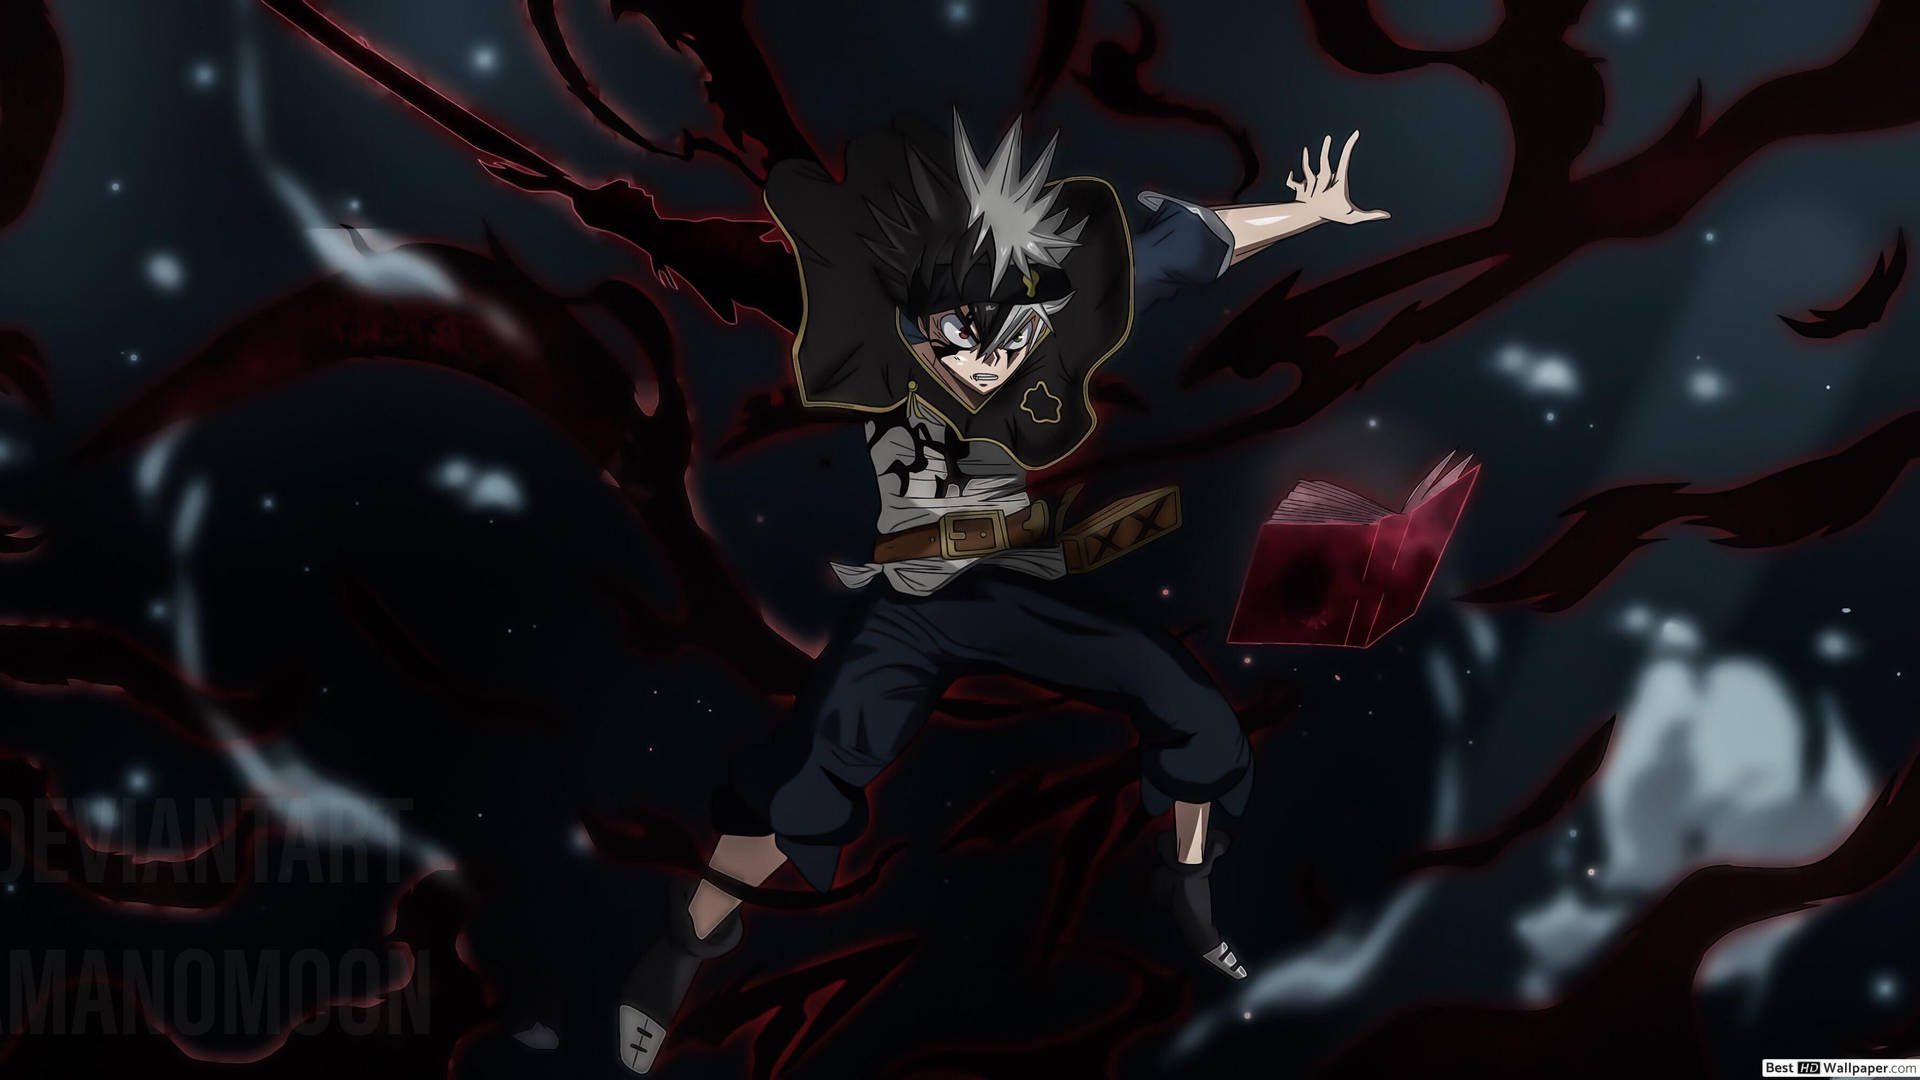 Join Asta in his quest to become Wizard King Wallpaper